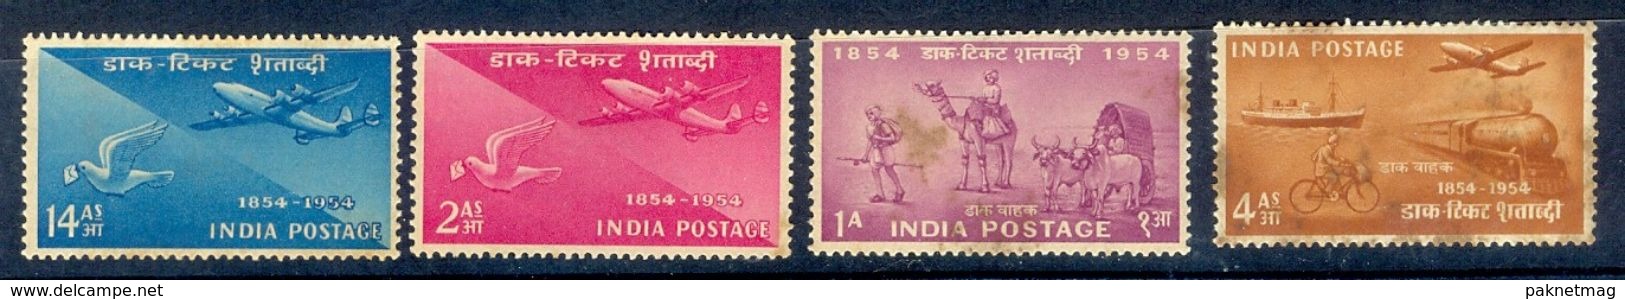 S143- India 1954. Stamp Centenary, Airplane, Pigeon Post.Train, Ship. Mail, Airmail, Transport, Postman, Camel. - Used Stamps